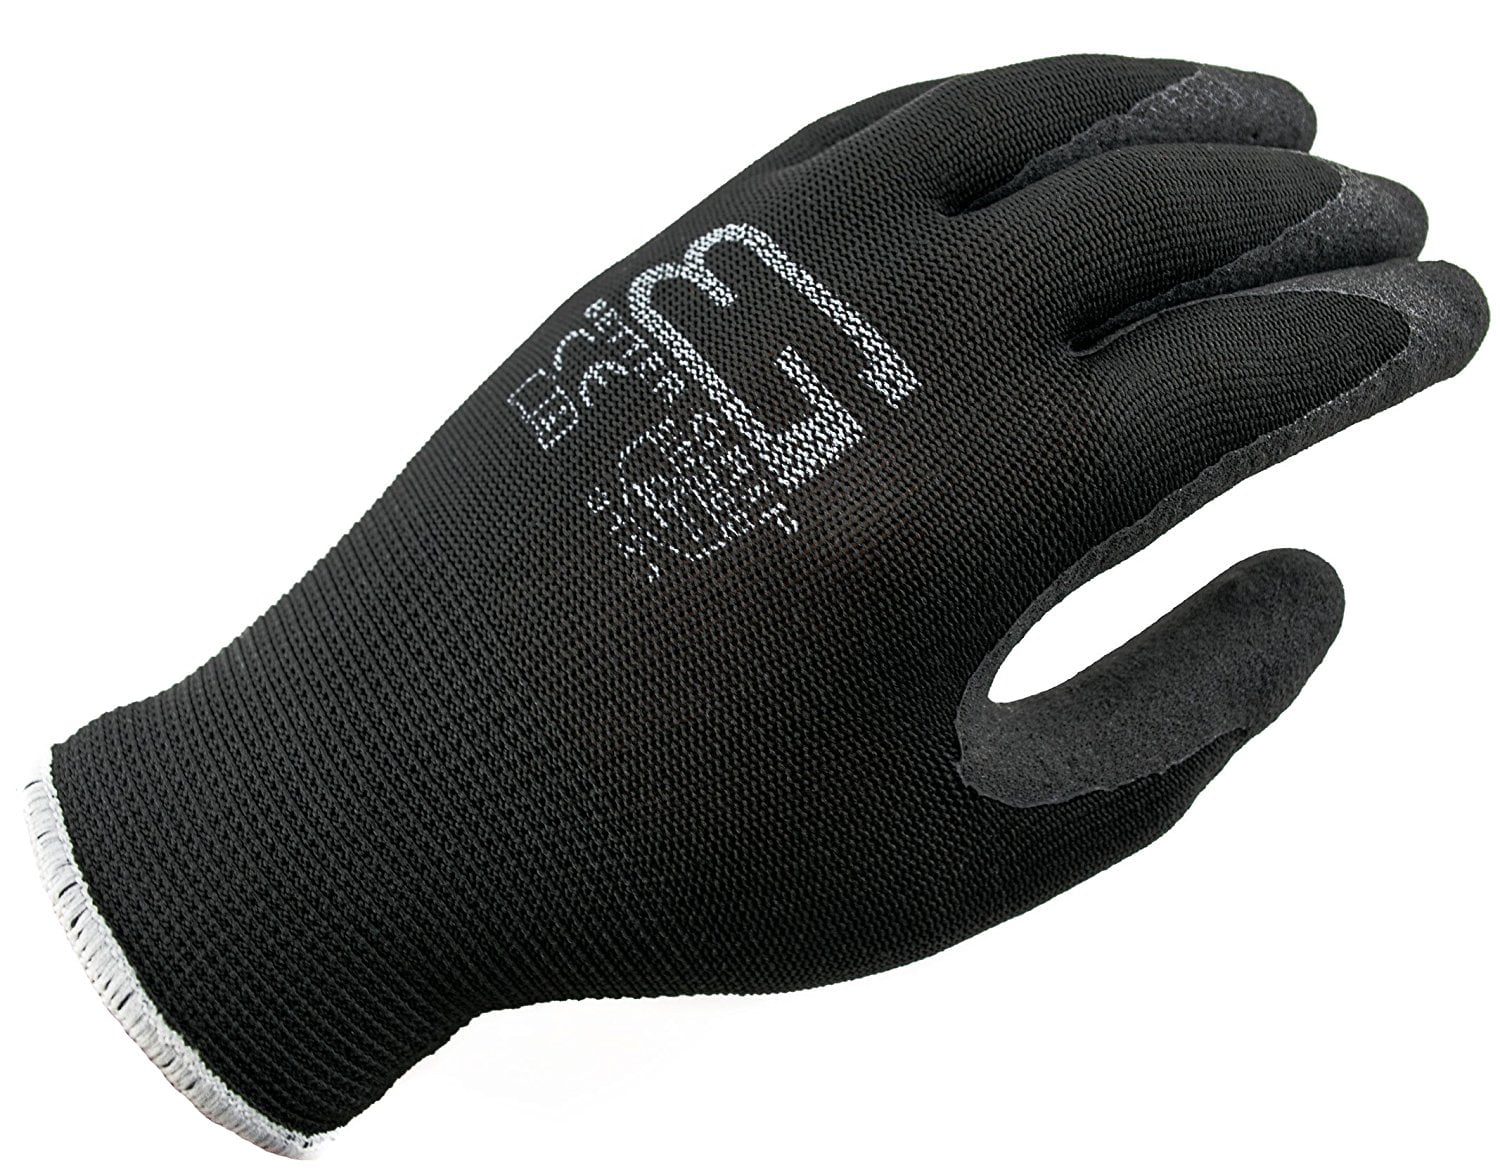 Work gloves latex Knurling TG 8-9-10 Grip-Flex Black and Red 10 pairs 